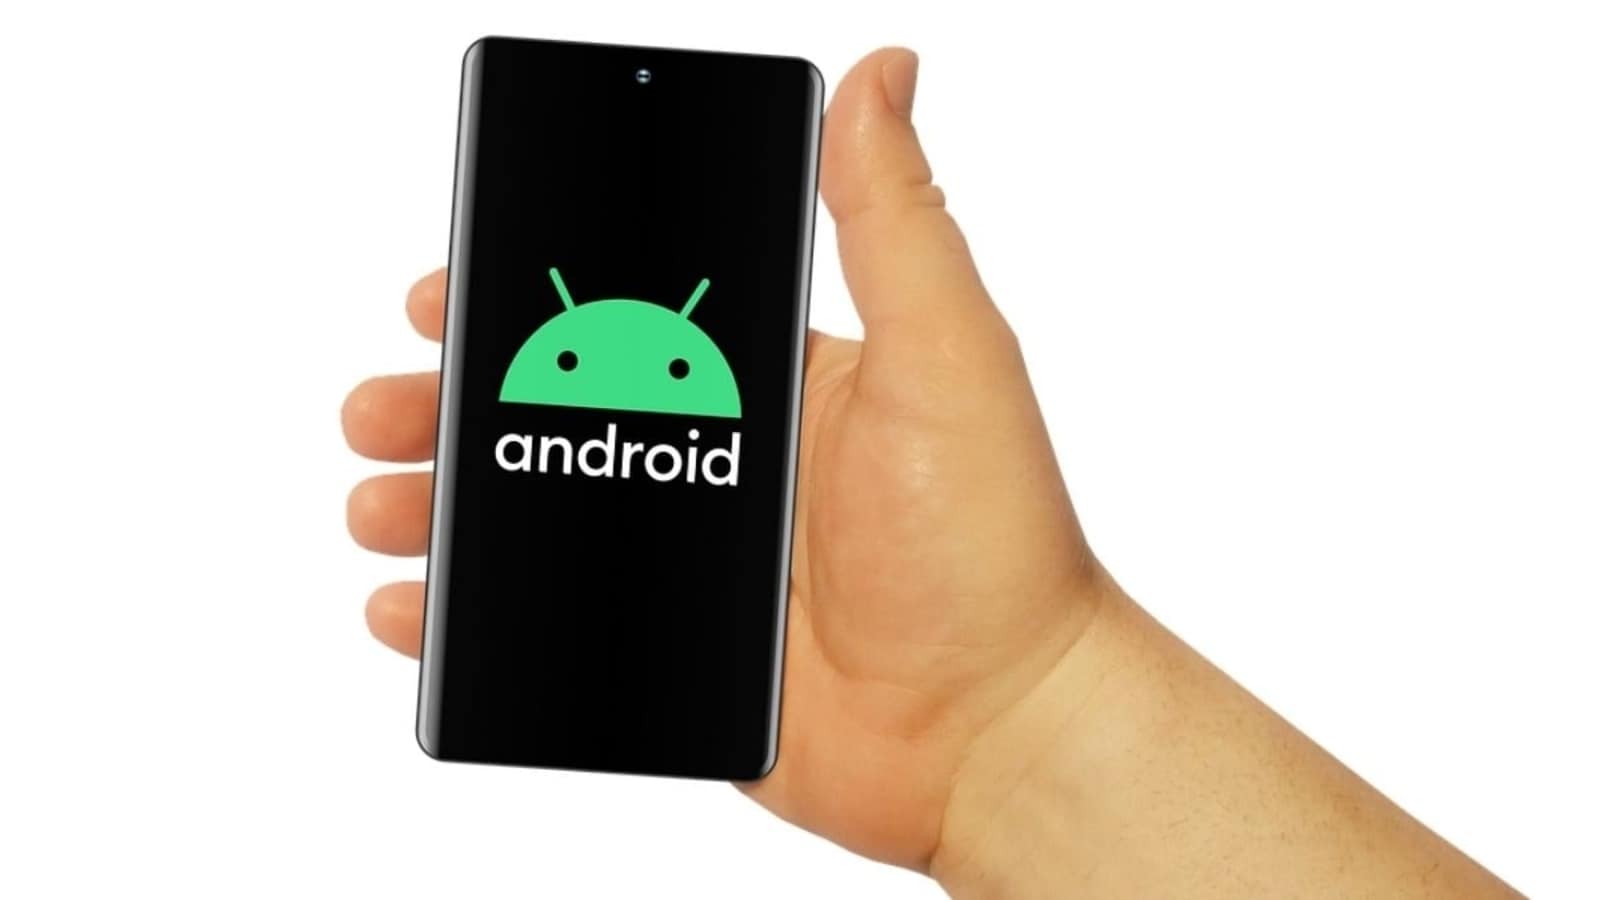 New stealthy Android malware stumps antivirus, poses huge threat to phones, study reveals